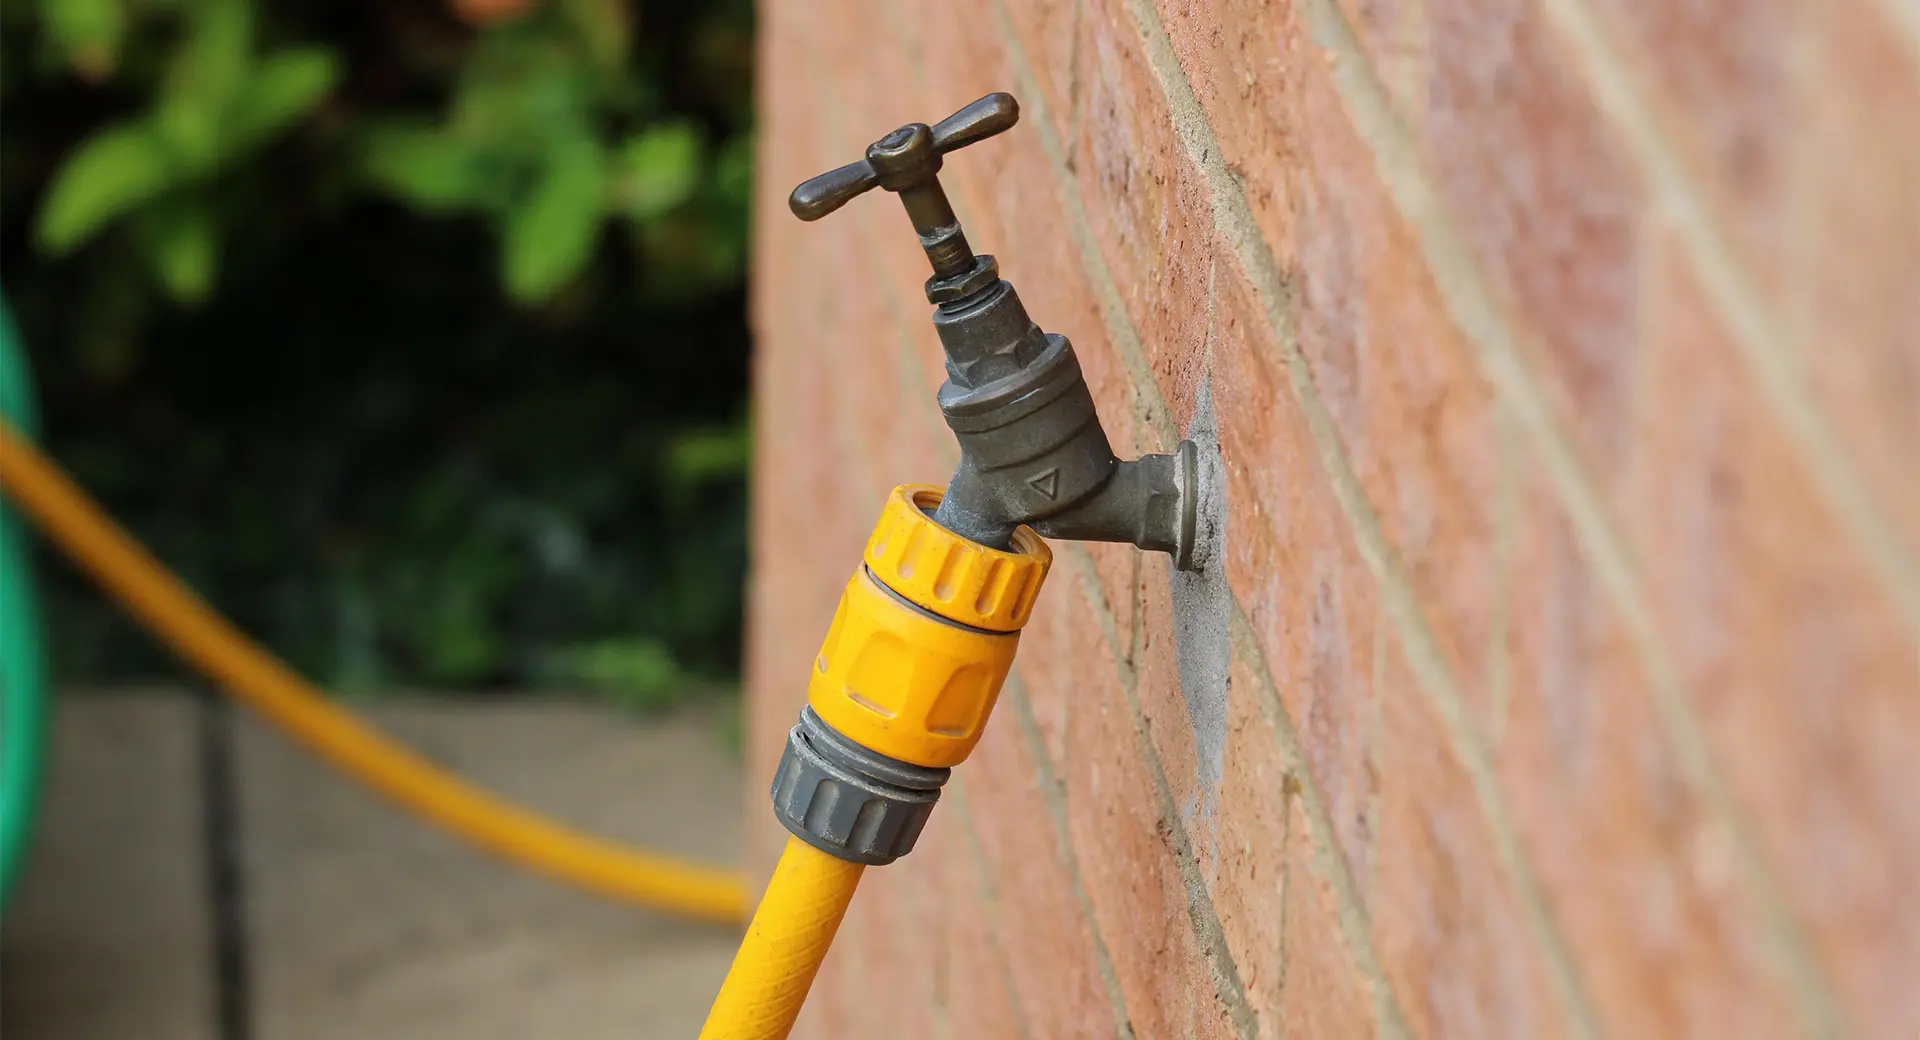 Hose connected to outside tap